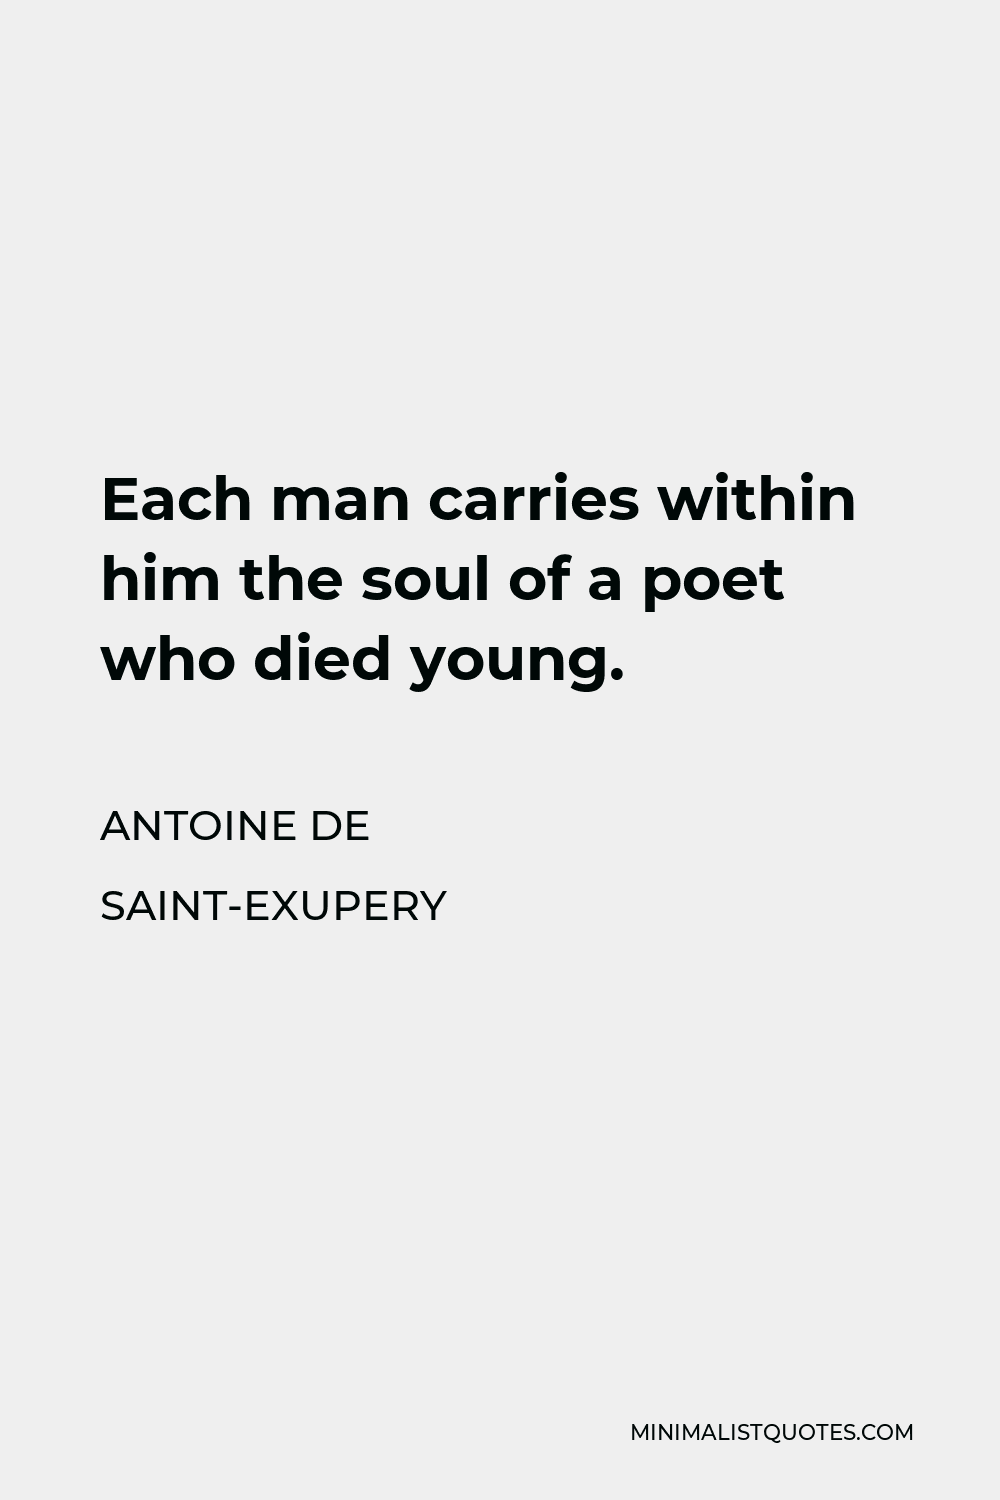 Antoine de Saint-Exupery Quote - Each man carries within him the soul of a poet who died young.